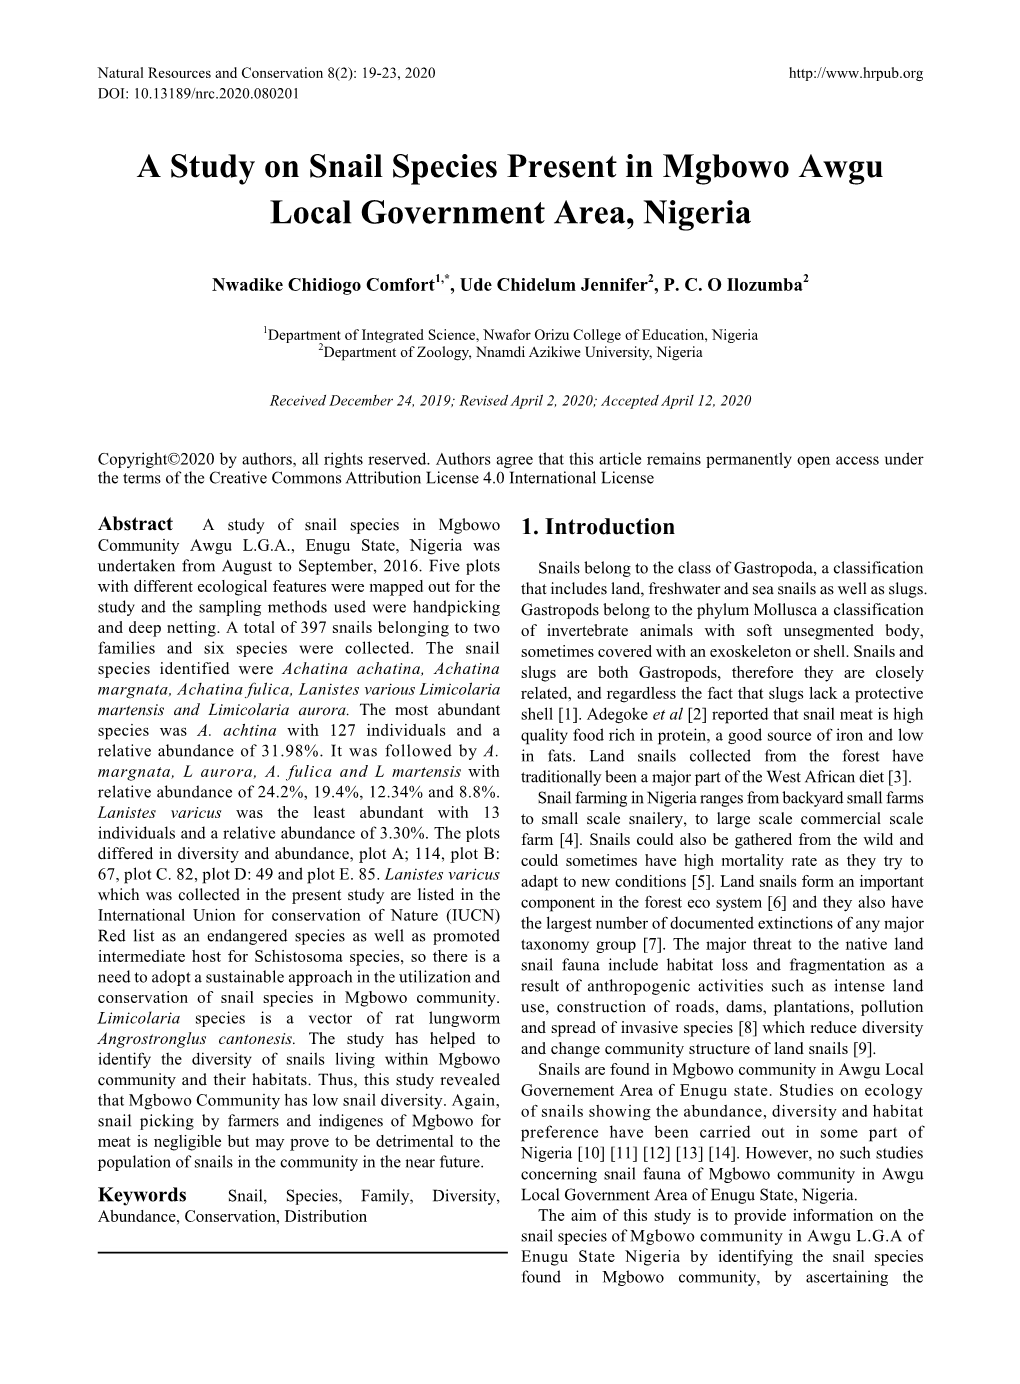 A Study on Snail Species Present in Mgbowo Awgu Local Government Area, Nigeria